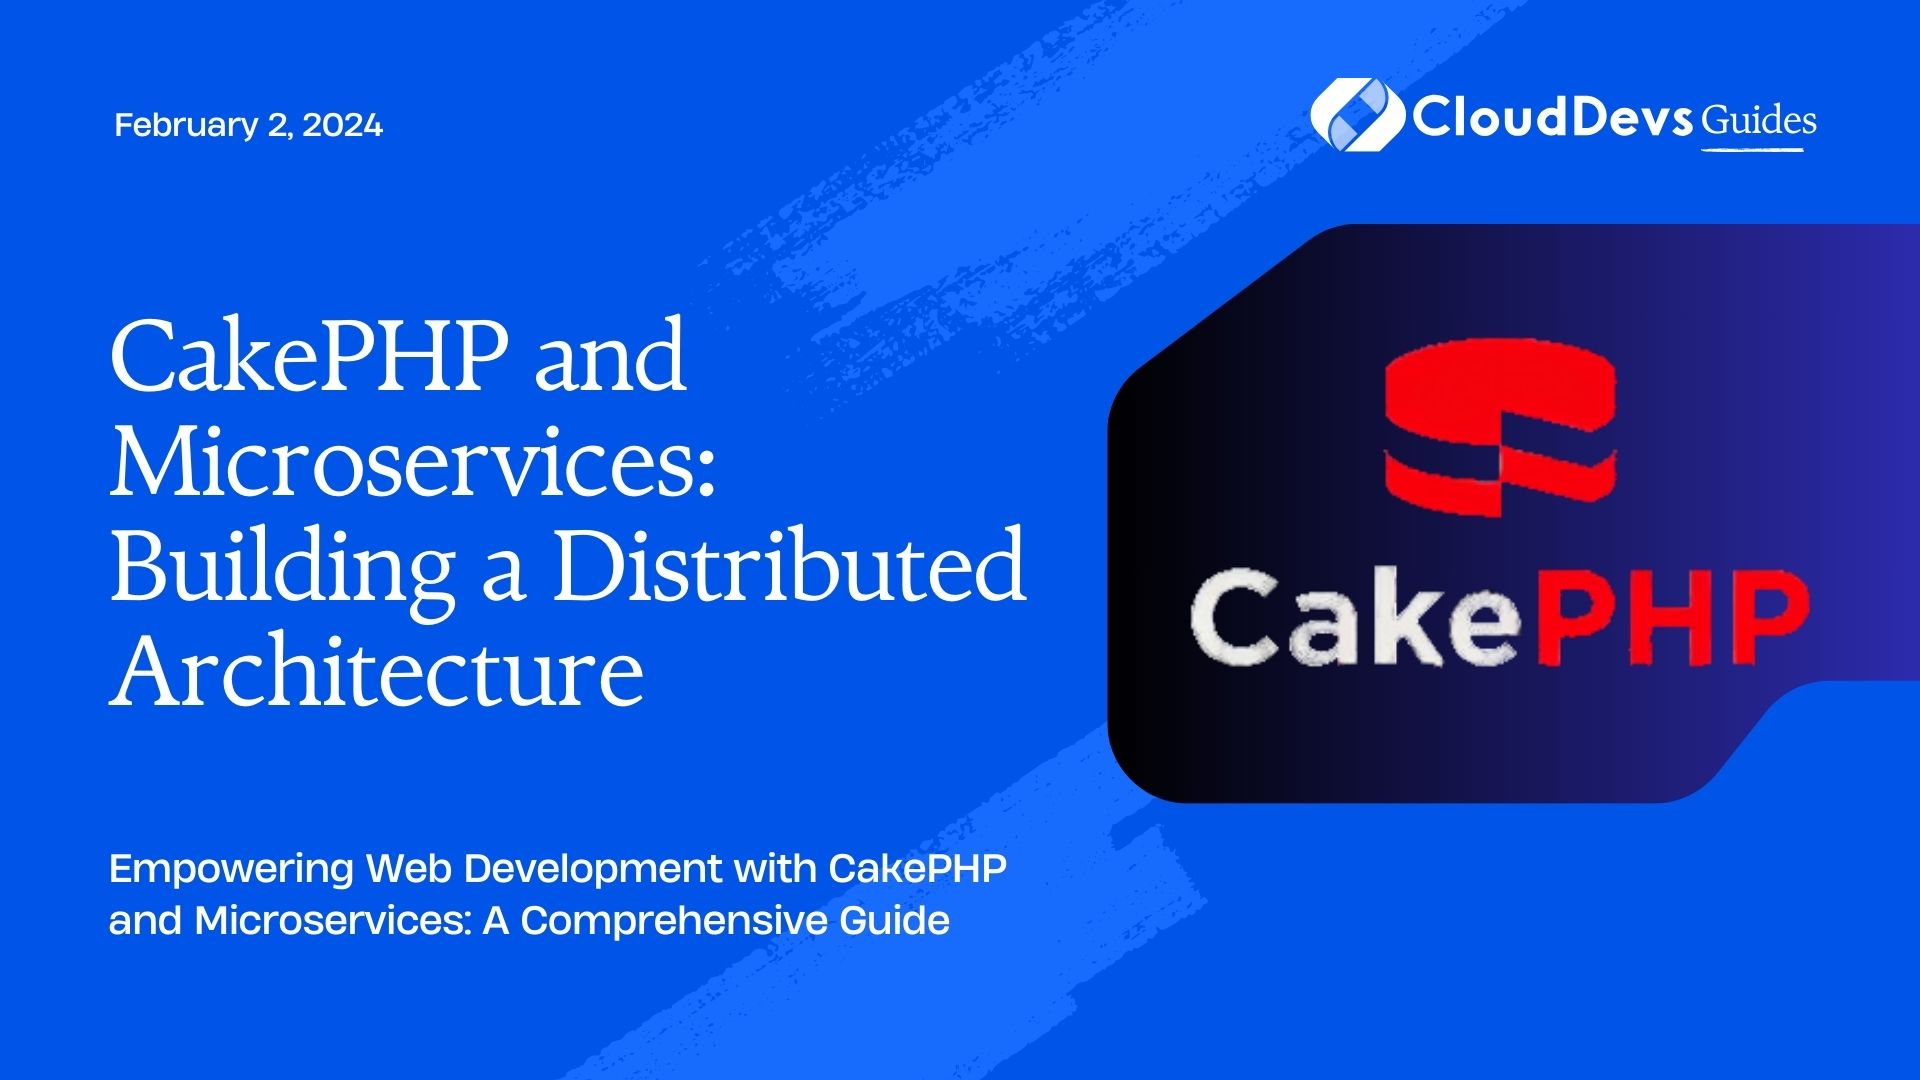 CakePHP and Microservices: Building a Distributed Architecture